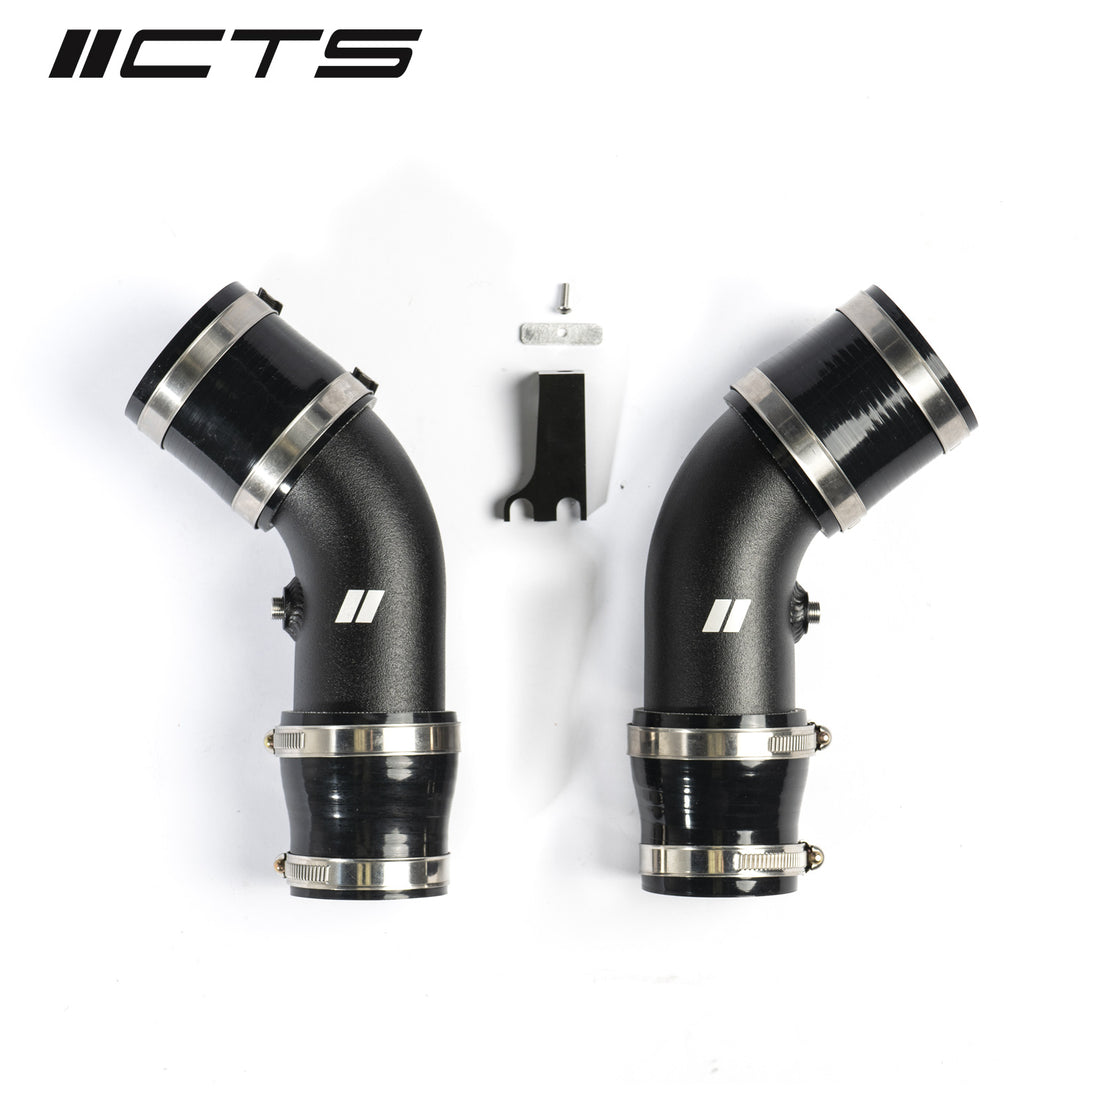 CTS Turbo BMW M5/M6 F10/F12/F13 S63 Charge Pipe Upgrade Kit CTS Turbo IT-820